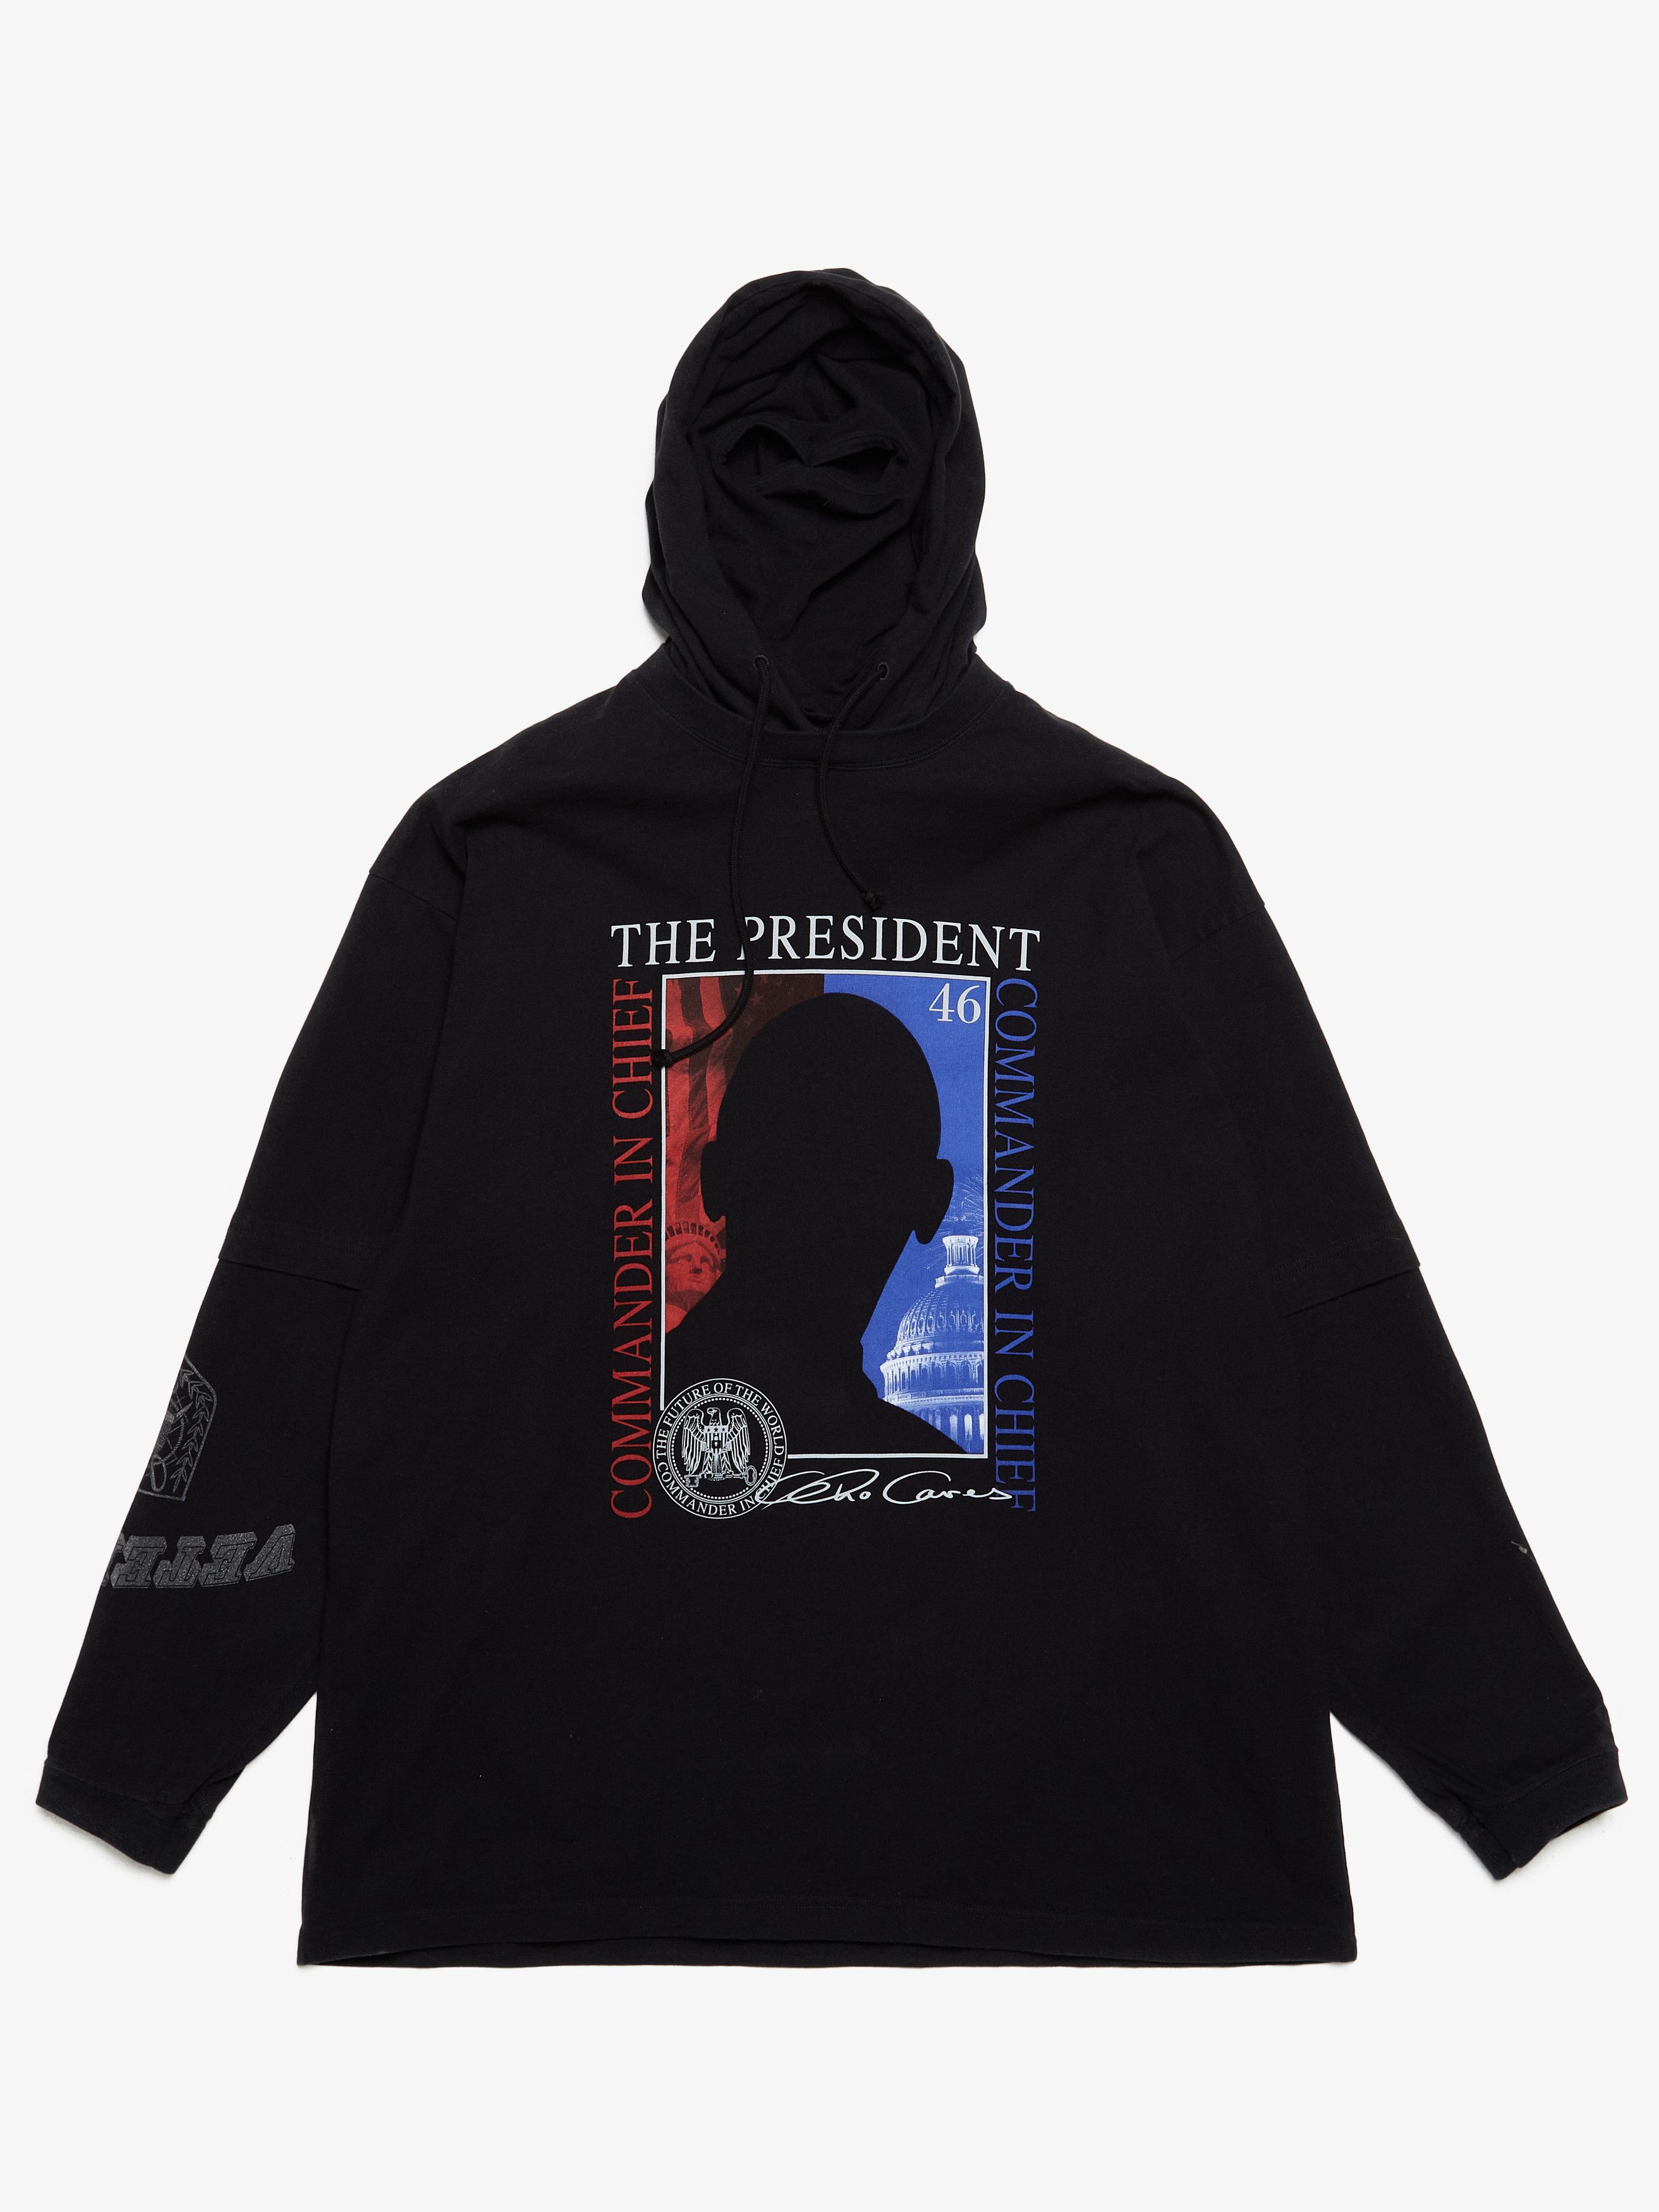 Vetements AW20 The President Black Jersey Hoodie Size US M / EU 48-50 / 2 - 1 Preview